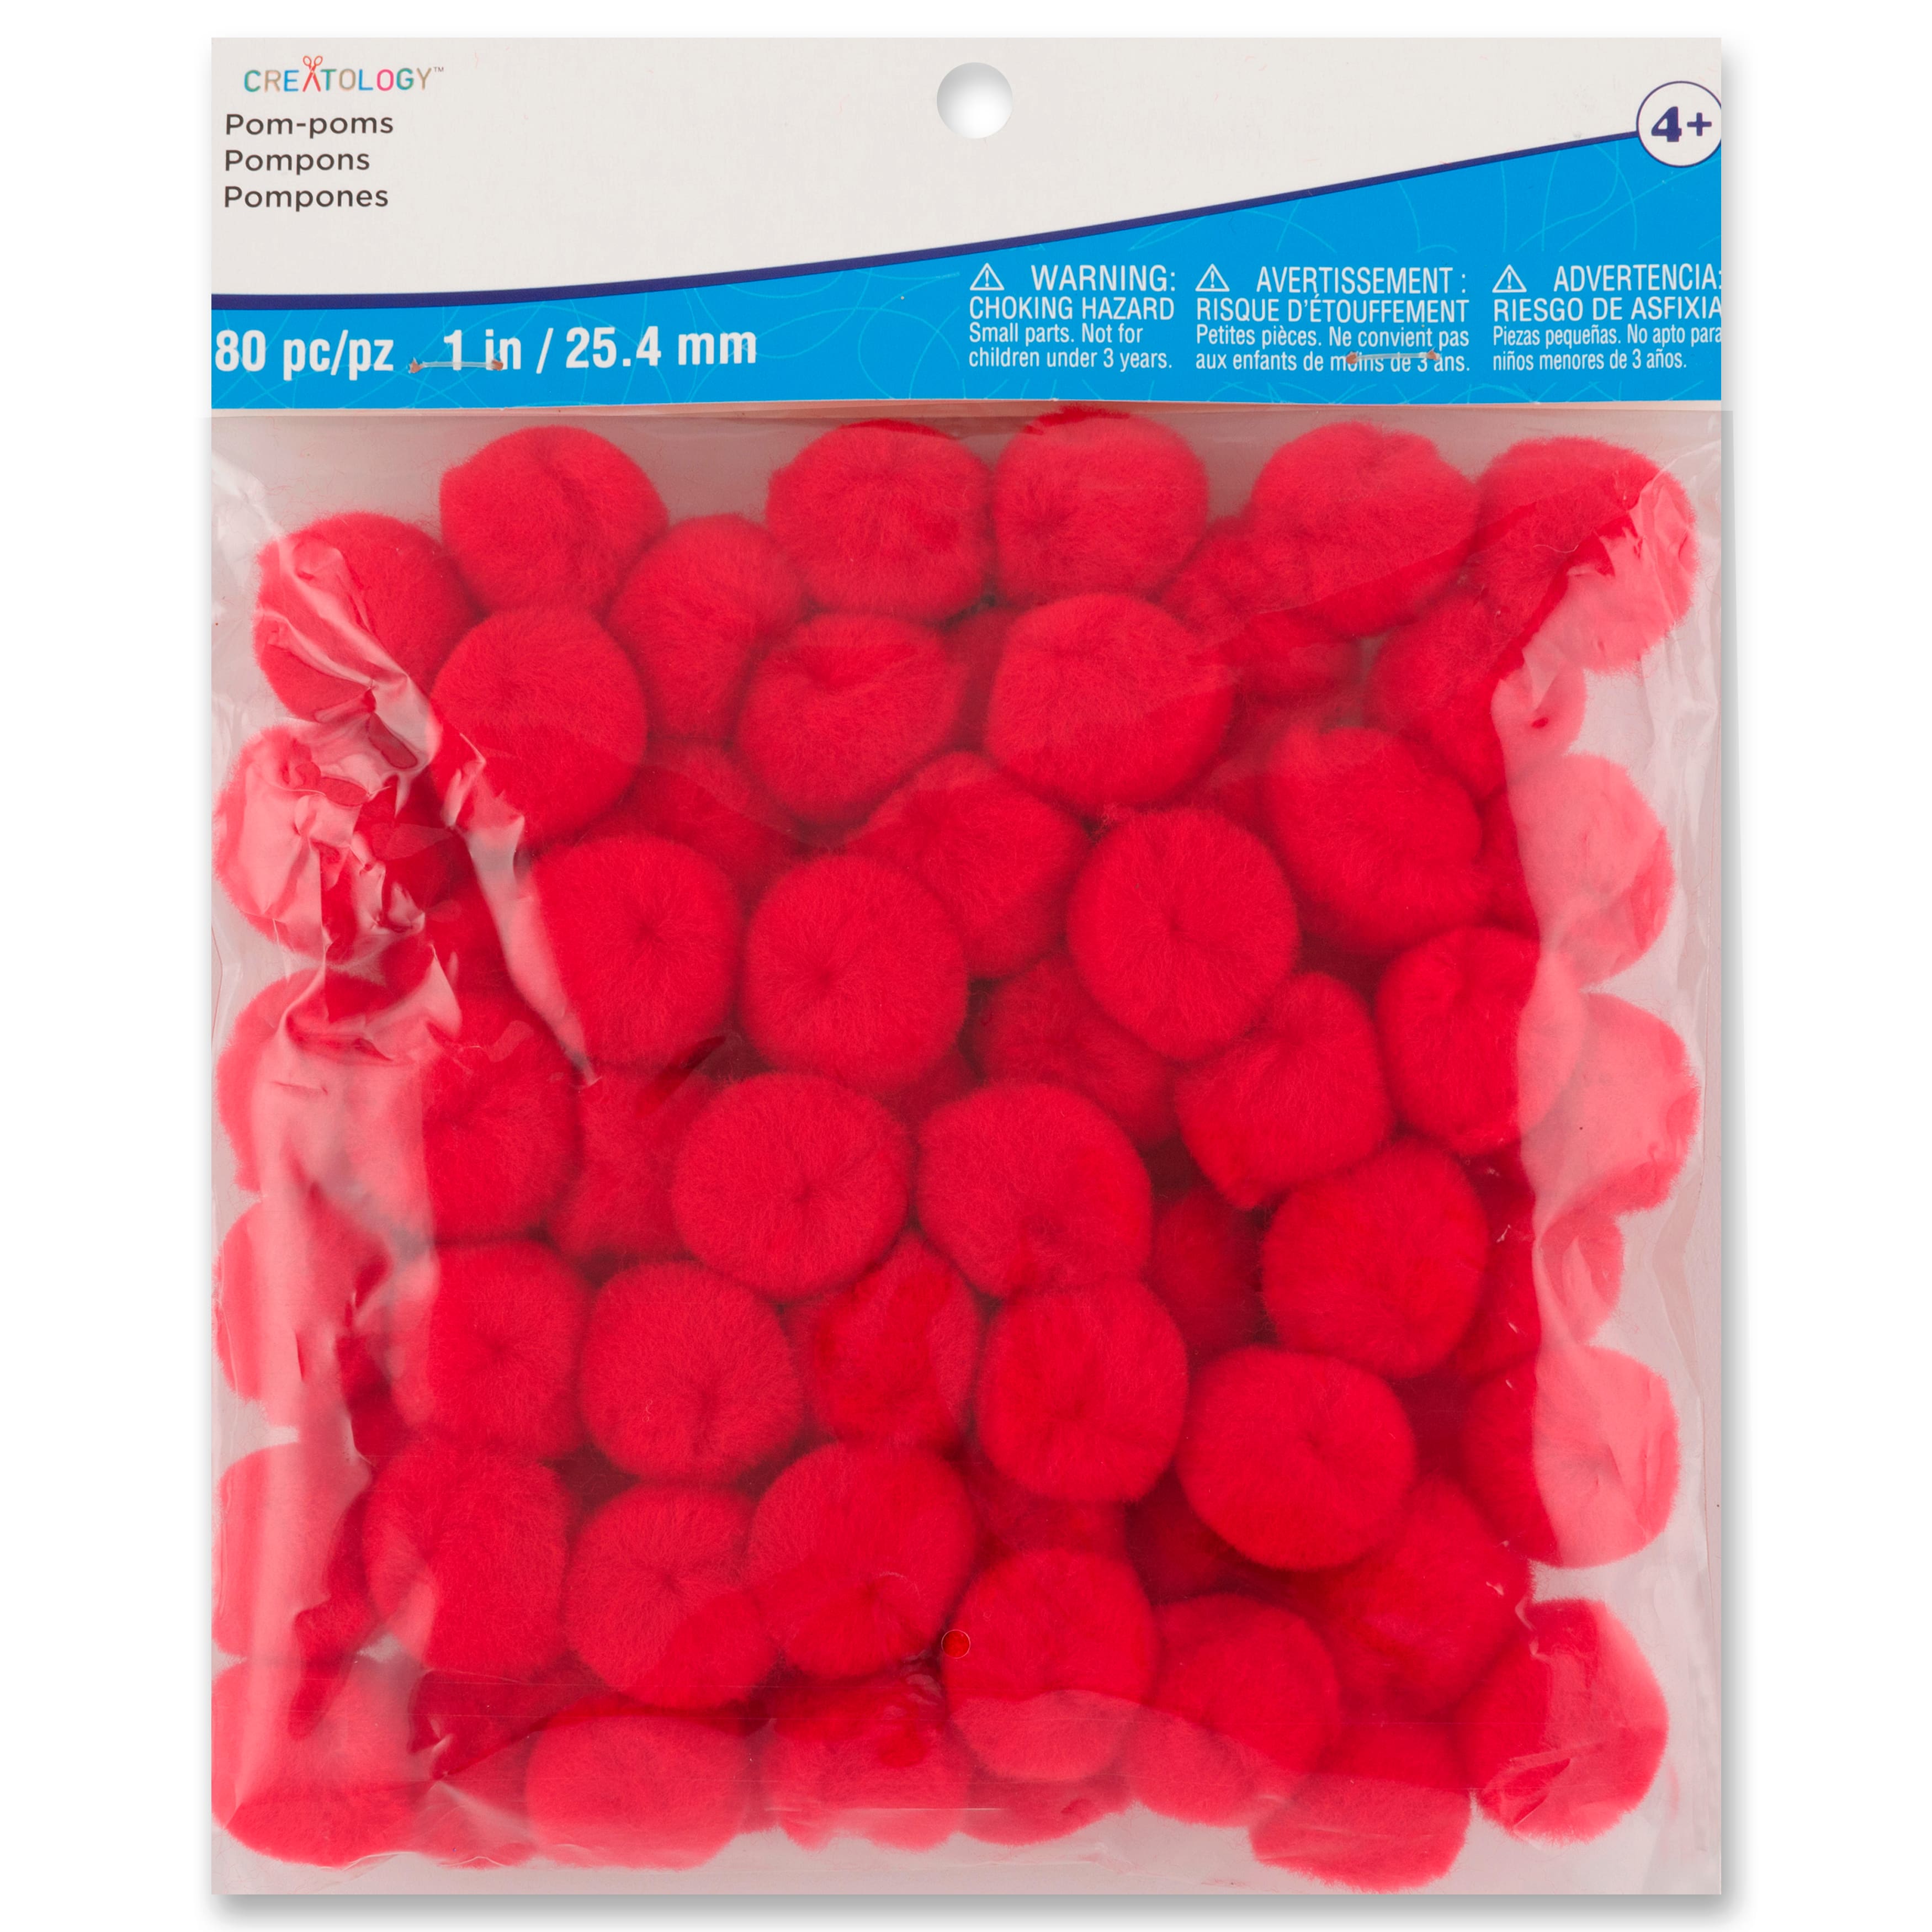 24 Packs: 65 Ct. (1,560 Total) 1/2 inch Pom Poms by Creatology, Red